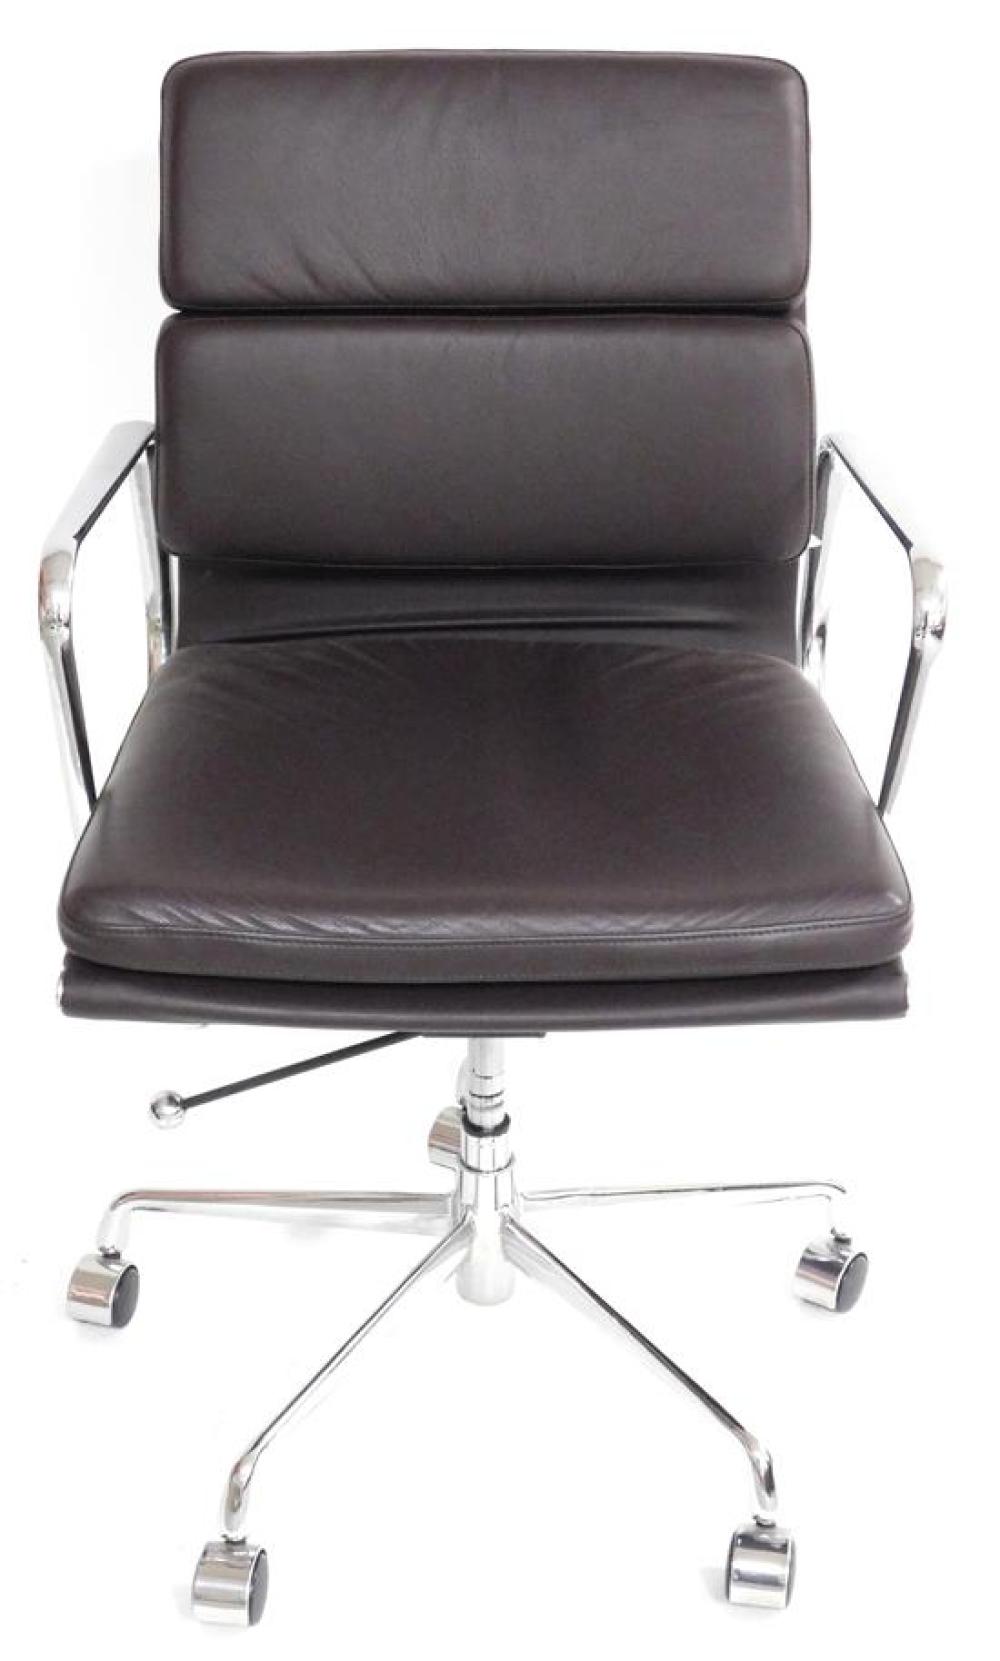 OFFICE CHAIR, EAMES-STYLE DESIGN